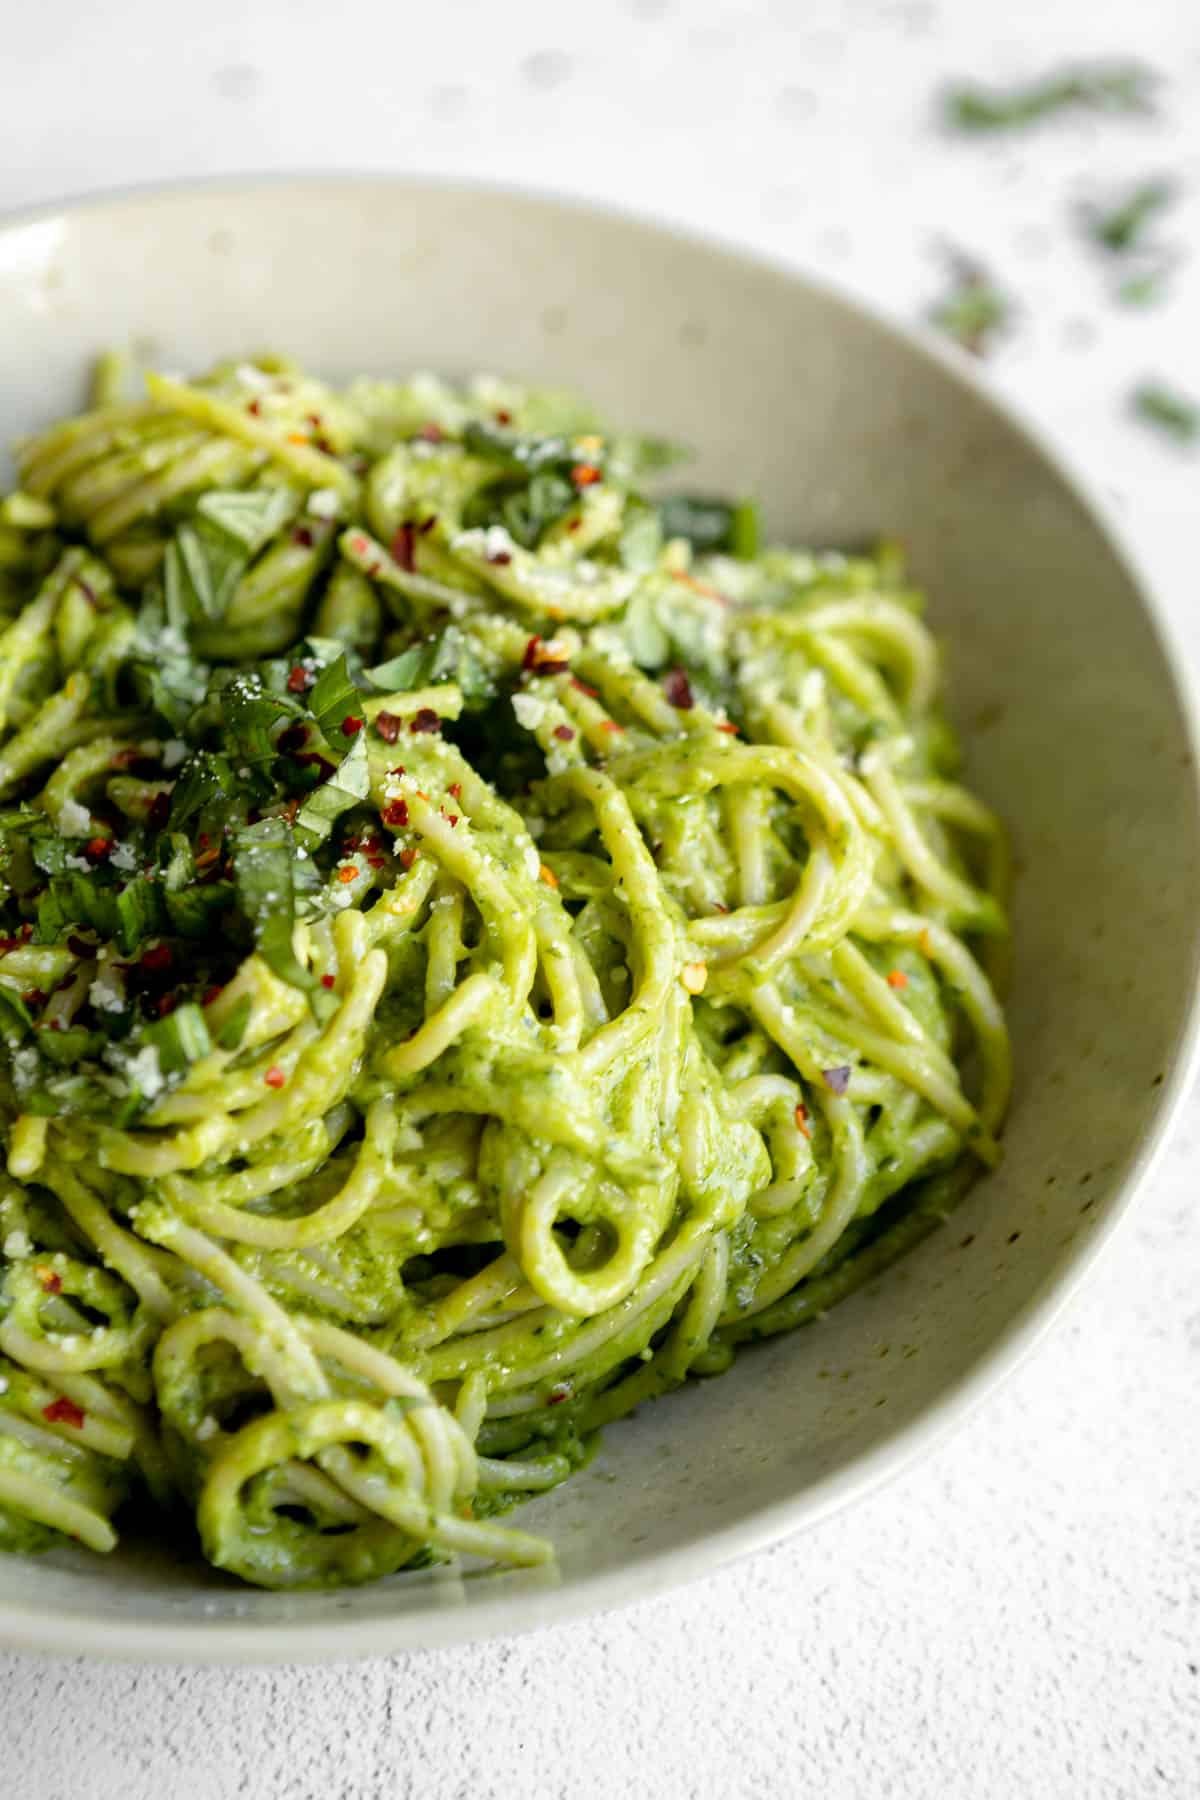 angled view of the avocado pesto pasta in a bowl